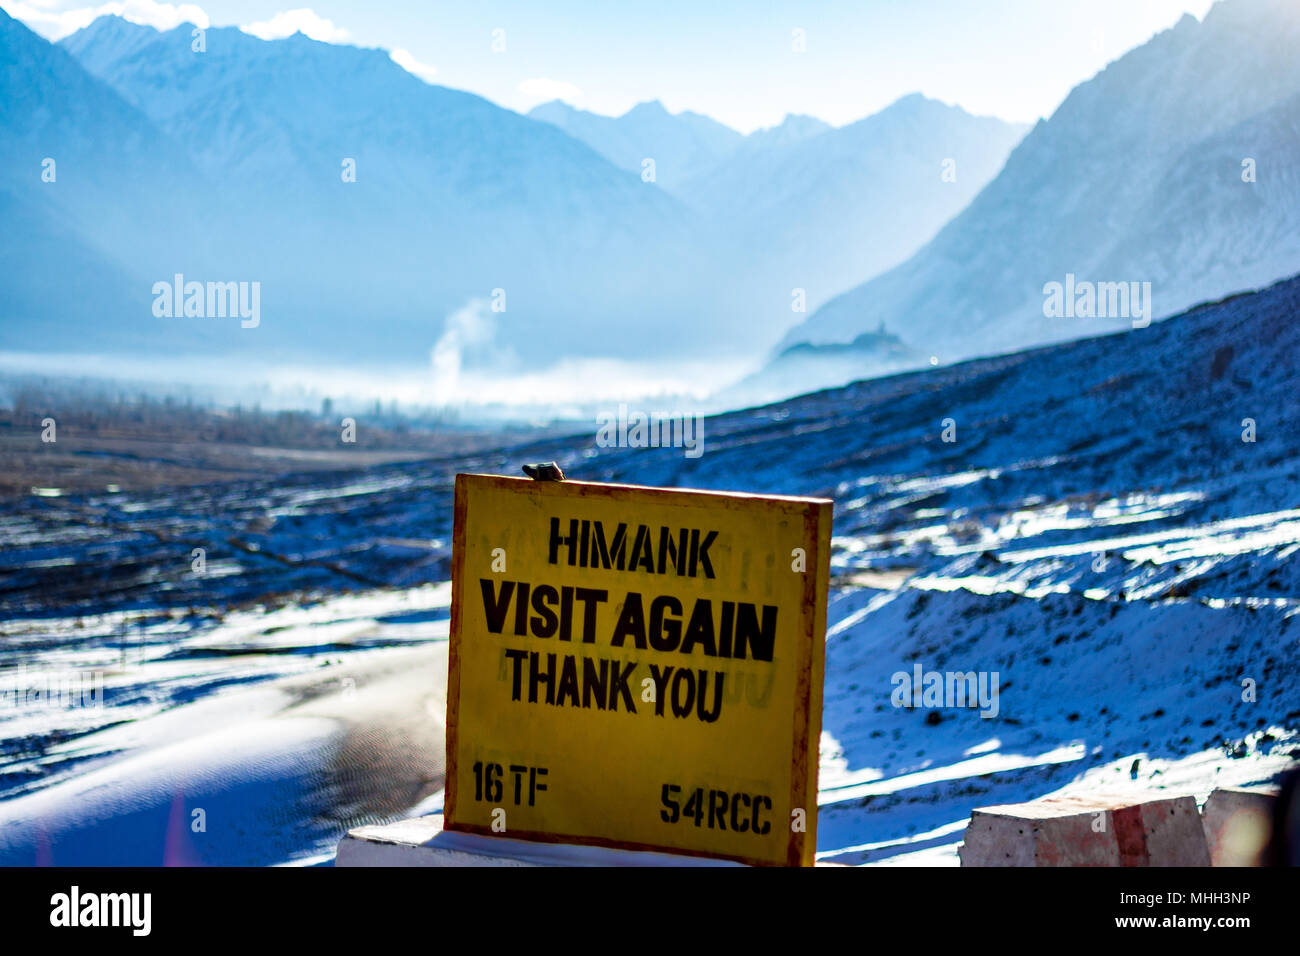 HIMANK - The sign board management committee greets ' VISIT AGAIN THANK YOU '. Stone milestone is located in Ladakh region of Jammu and Kashmir, India. Stock Photo